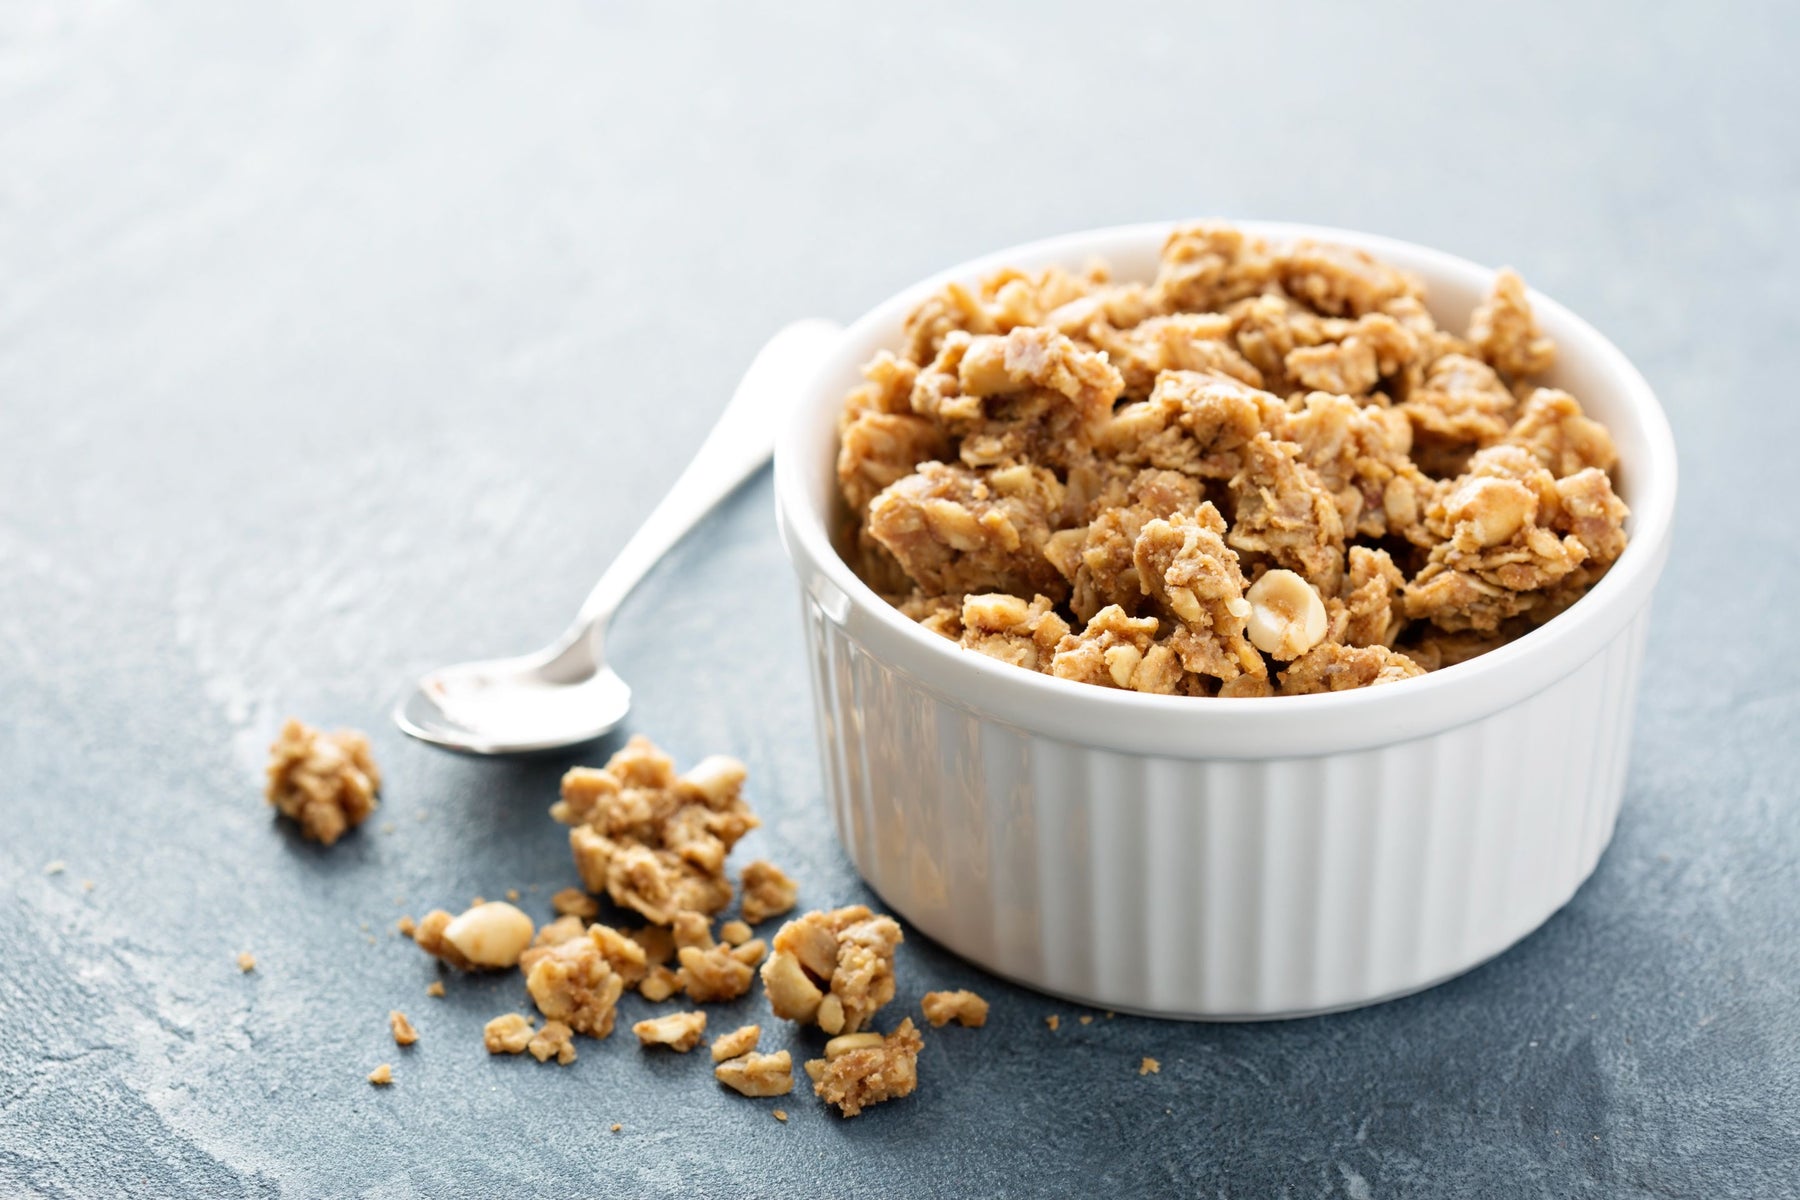 Brown Rice Flakes and Nut Clusters